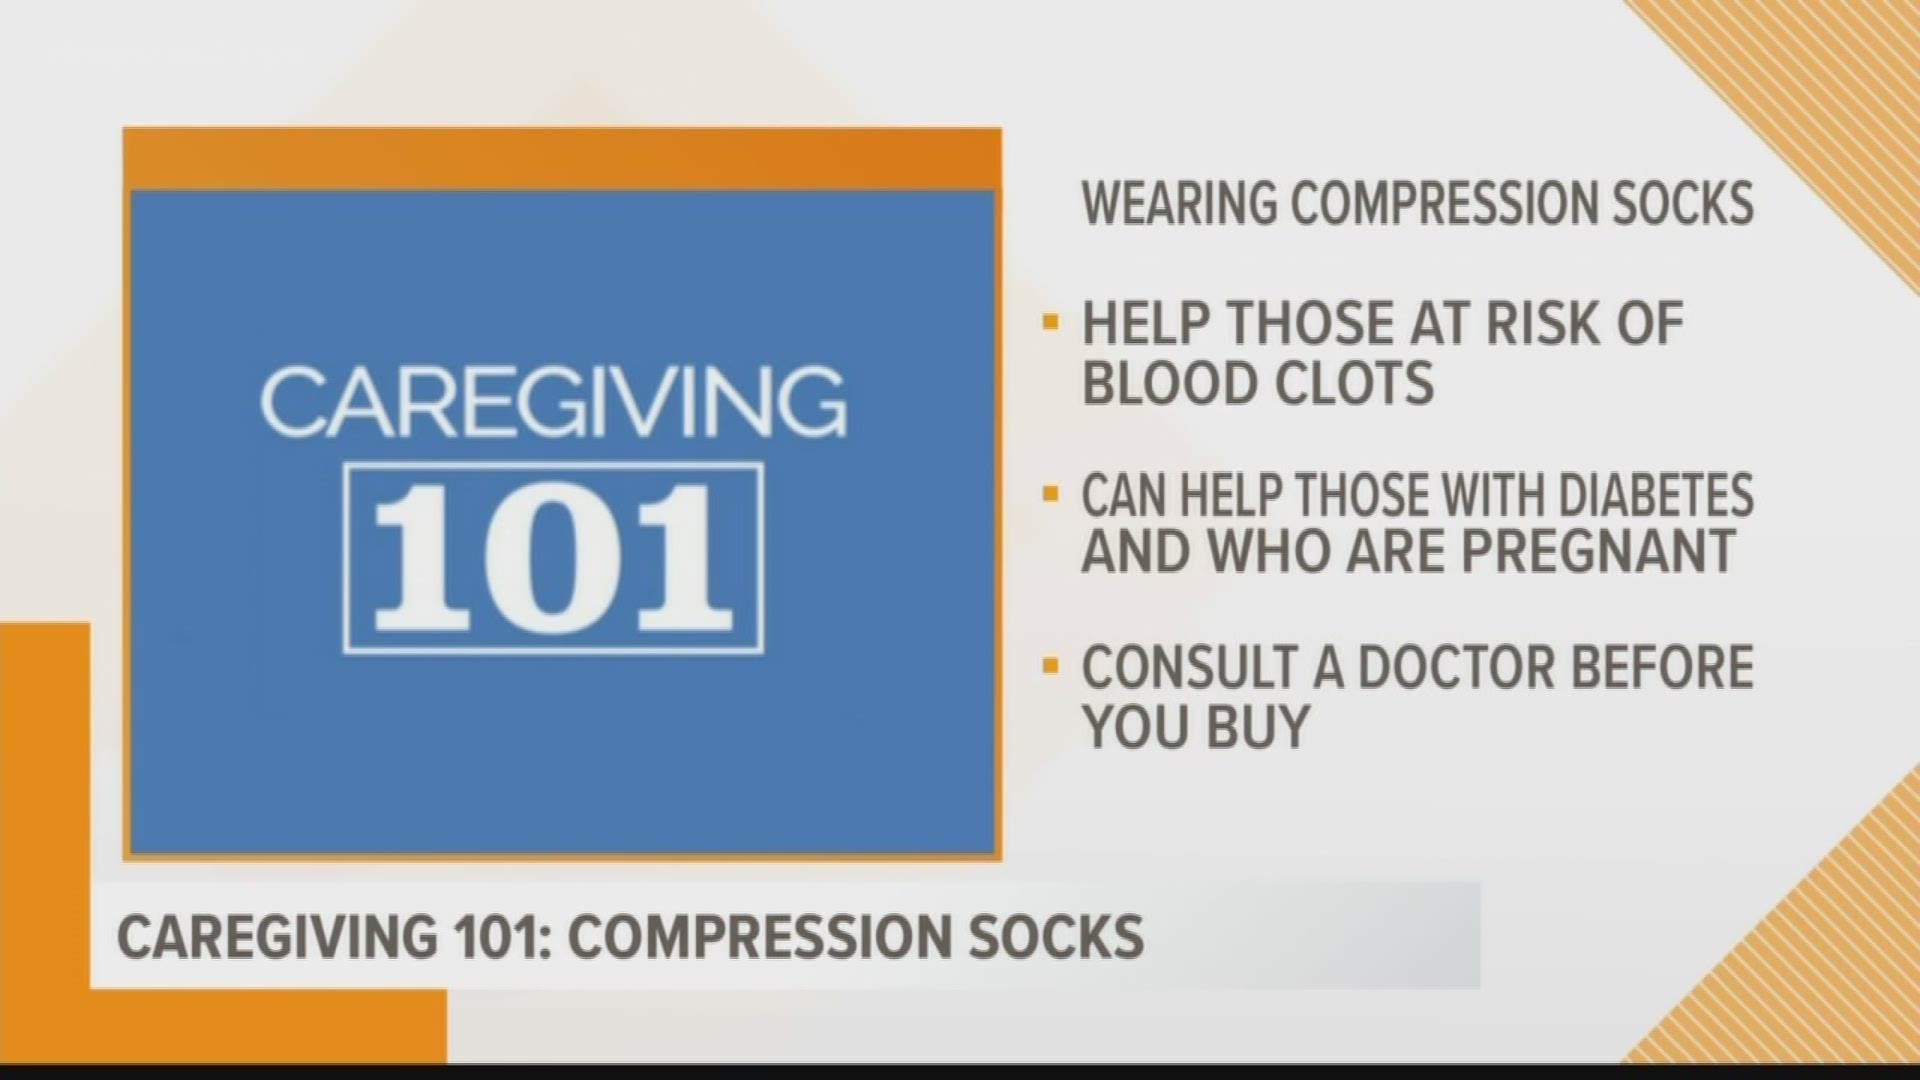 Scott Silknitter is in studio to break down what are compression socks and when to wear them.